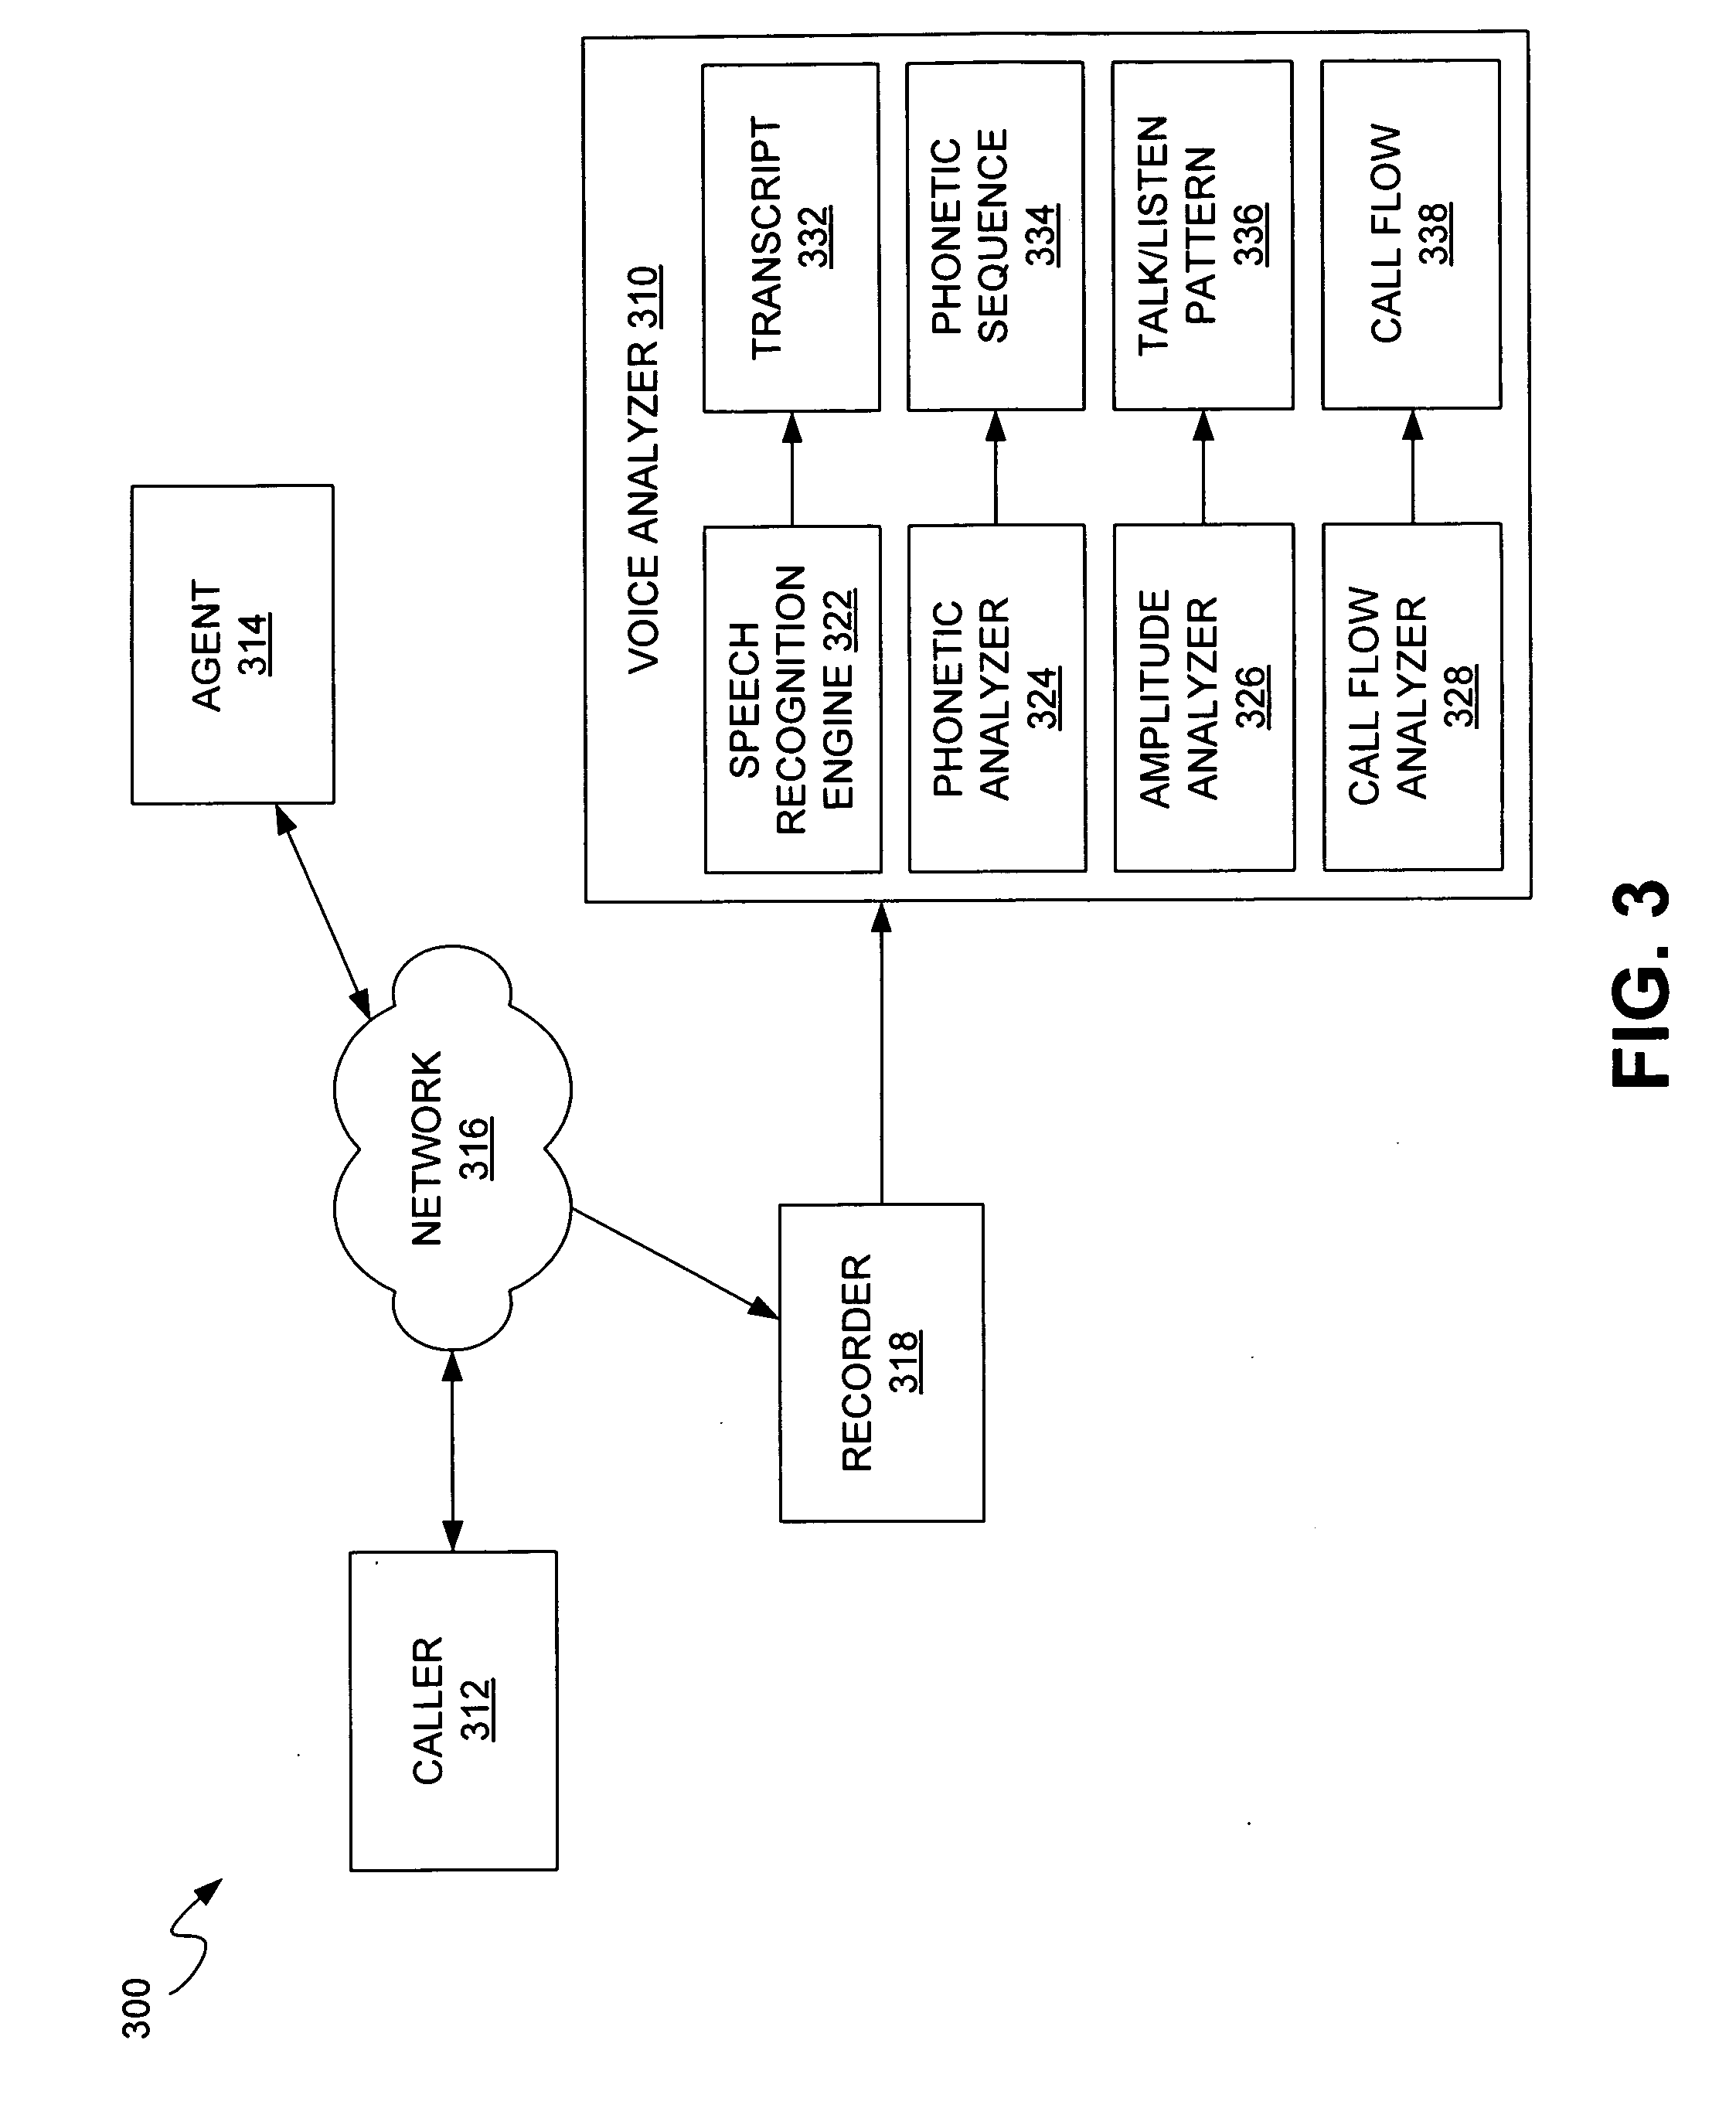 Systems and methods for analyzing audio components of communications